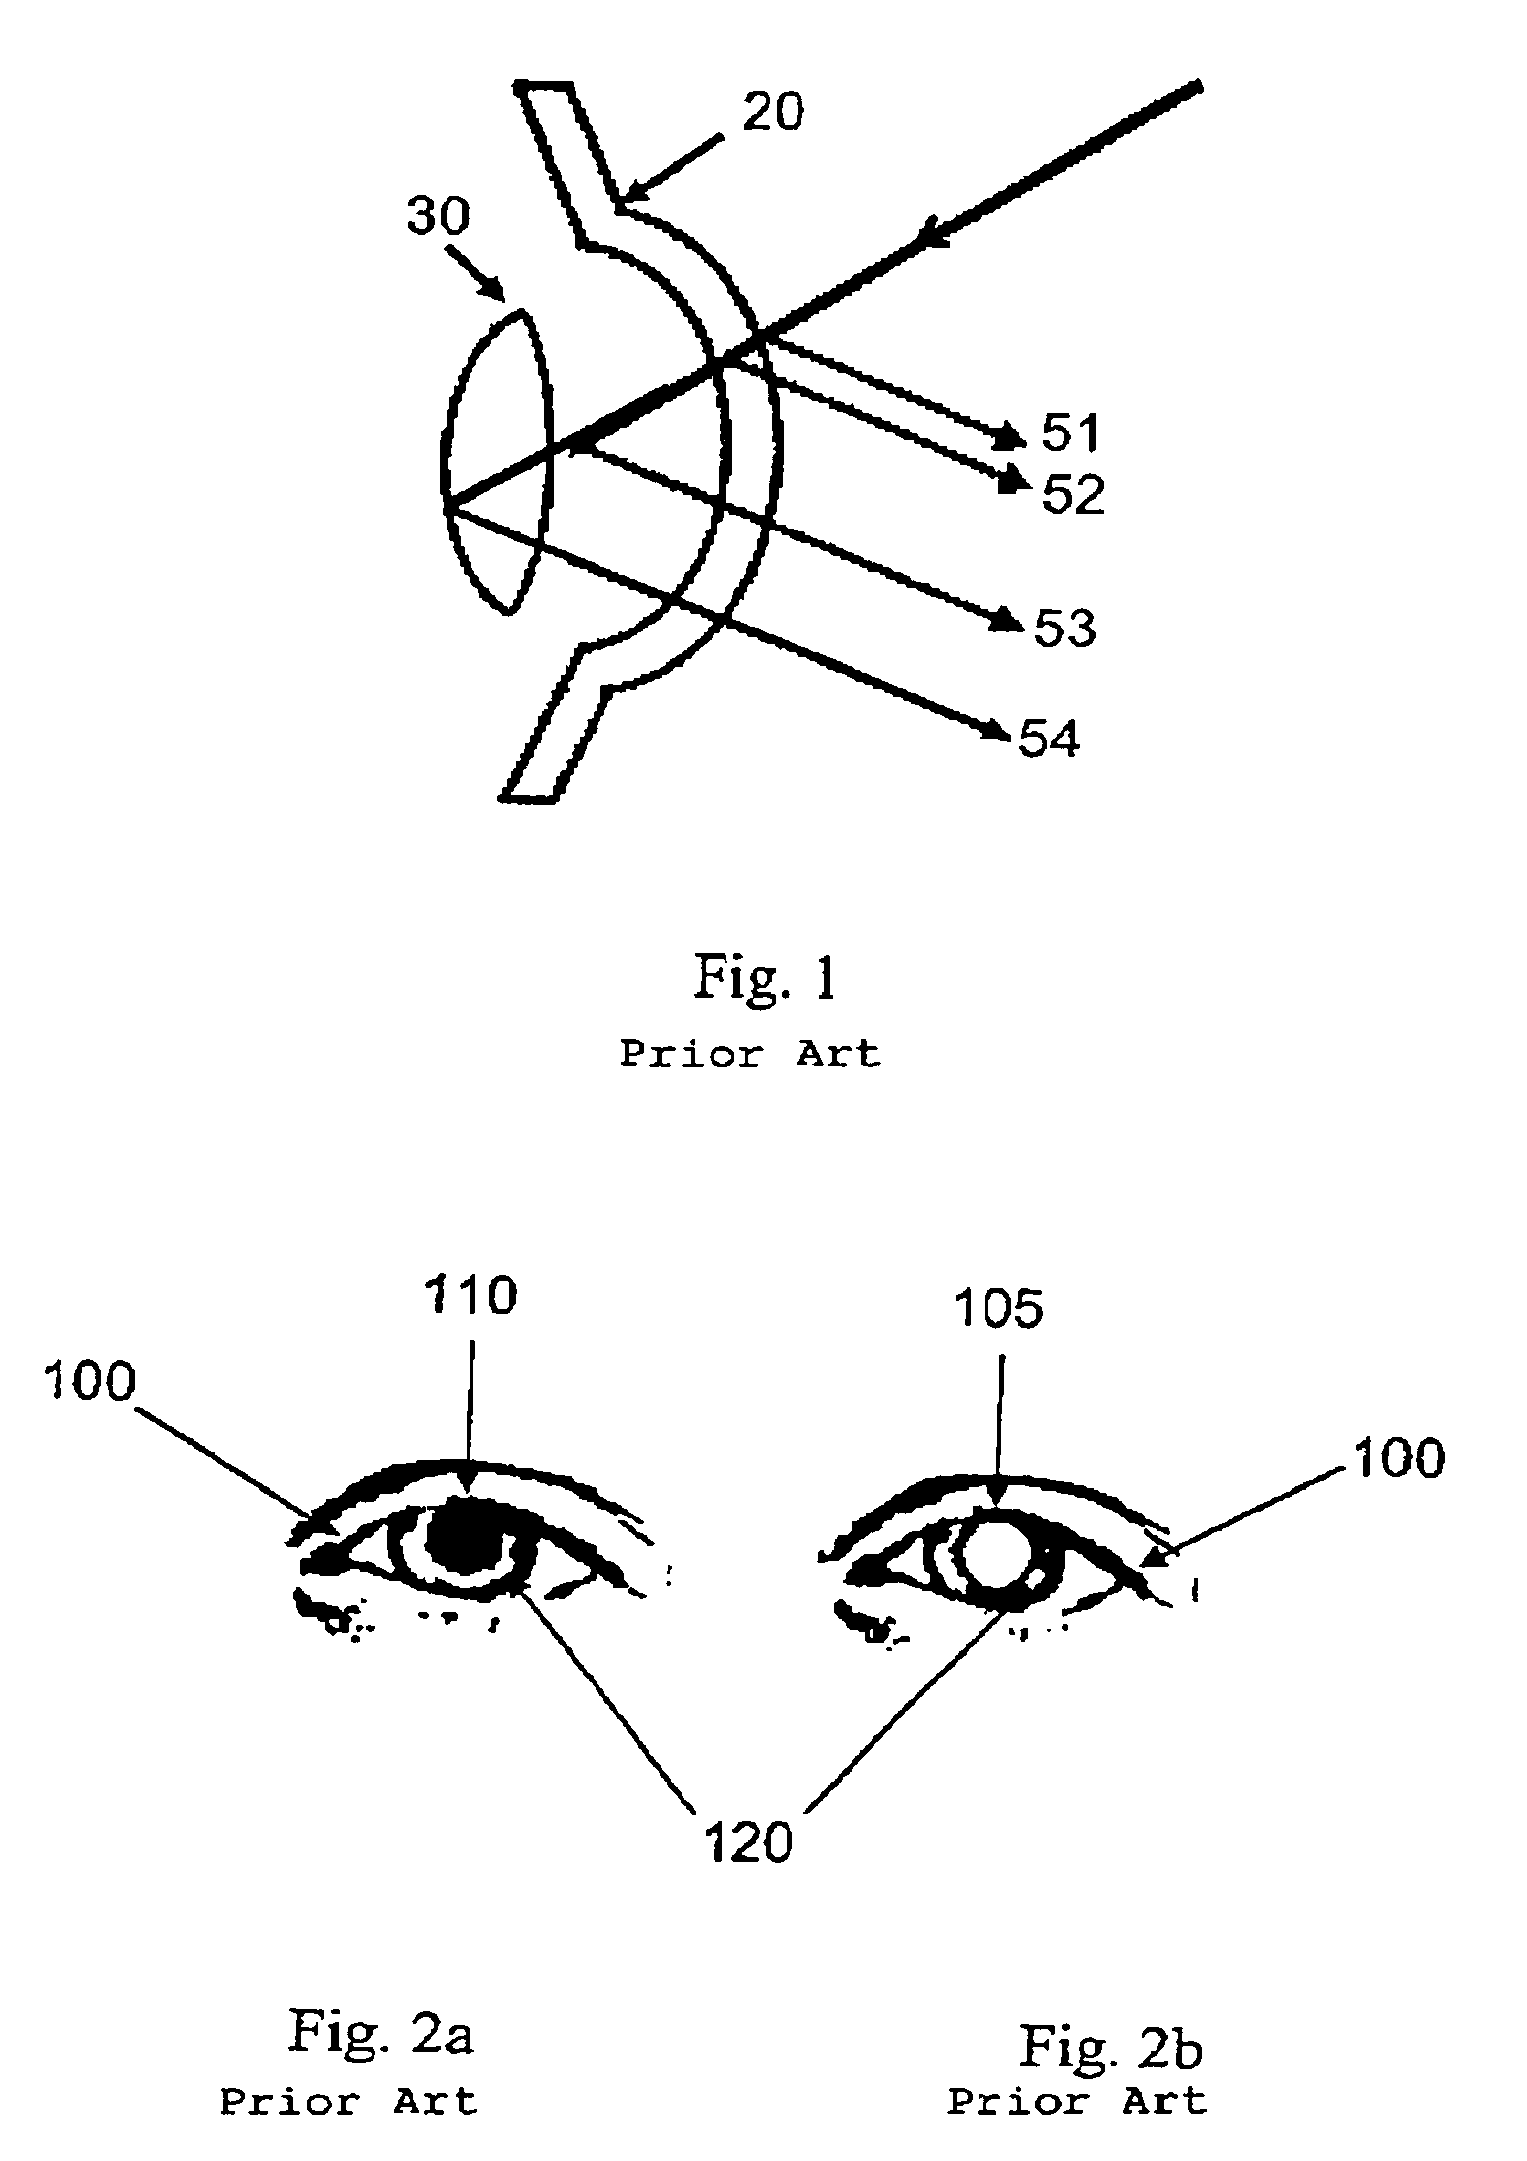 Projection-based head-mounted display with eye-tracking capabilities